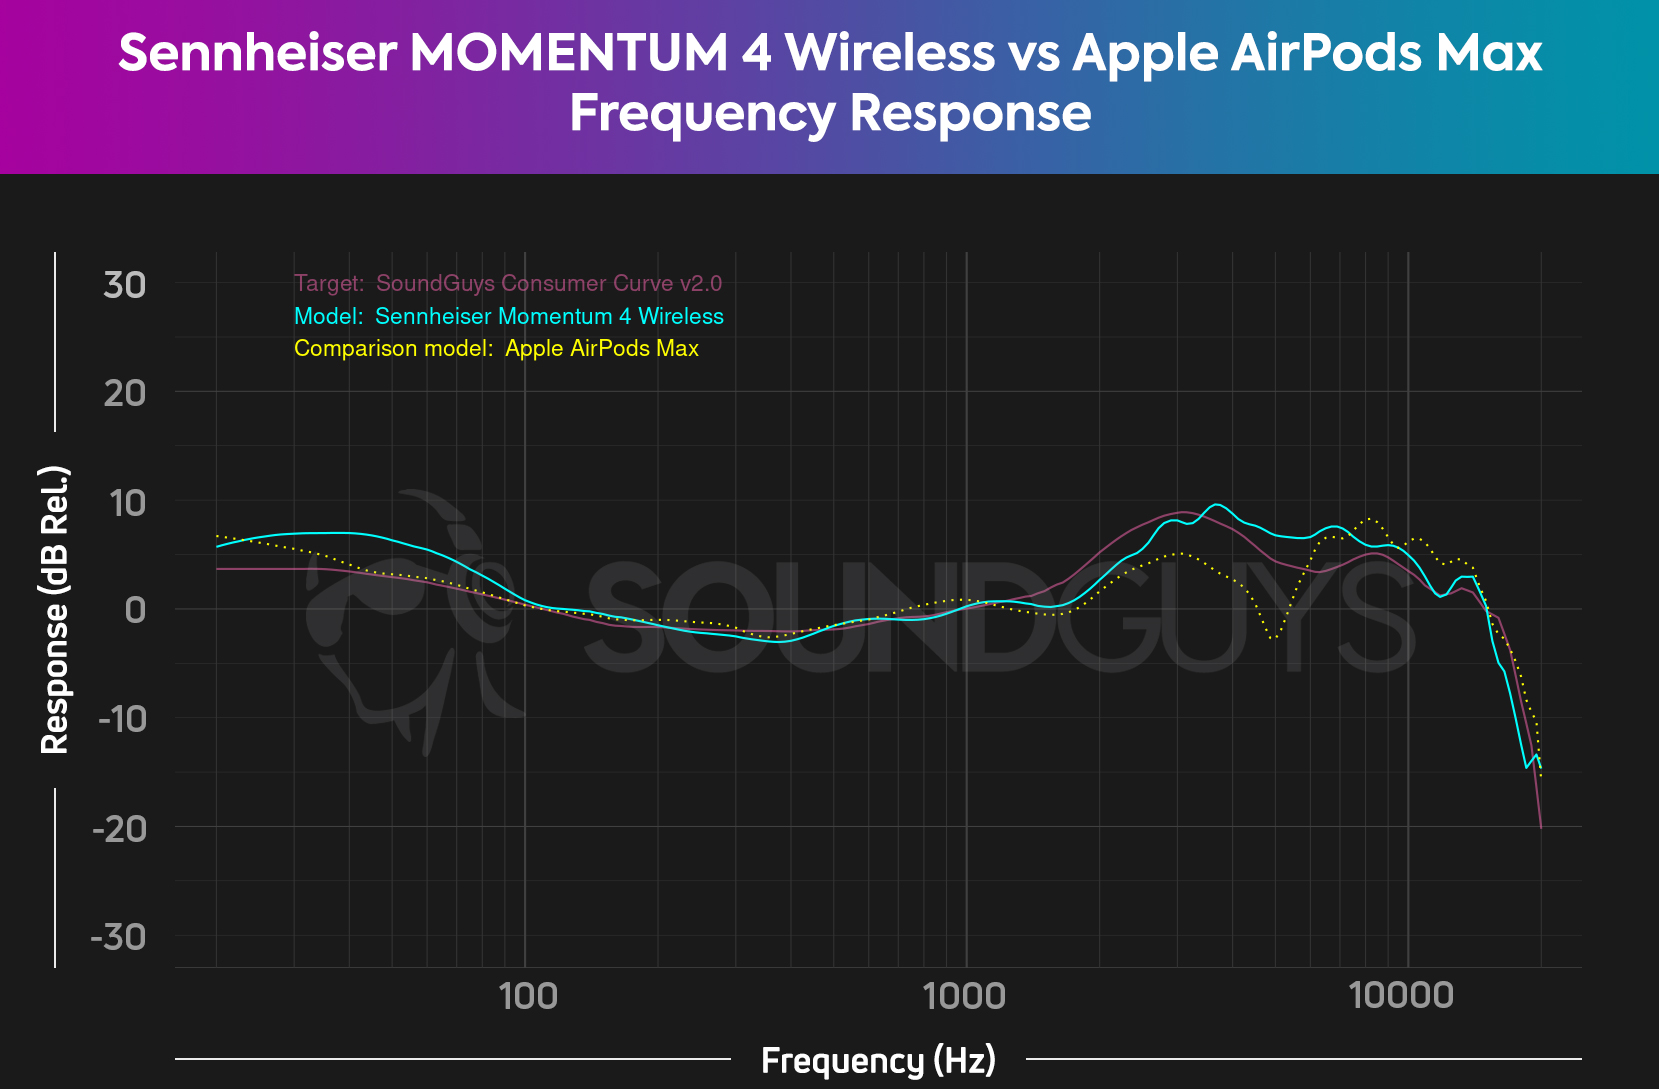 The frequency response comparison chart for the Apple AirPods Max compared to the Sennheiser MOMENTUM 4 Wireless, with both sound profiles being very close to our consumer curve.